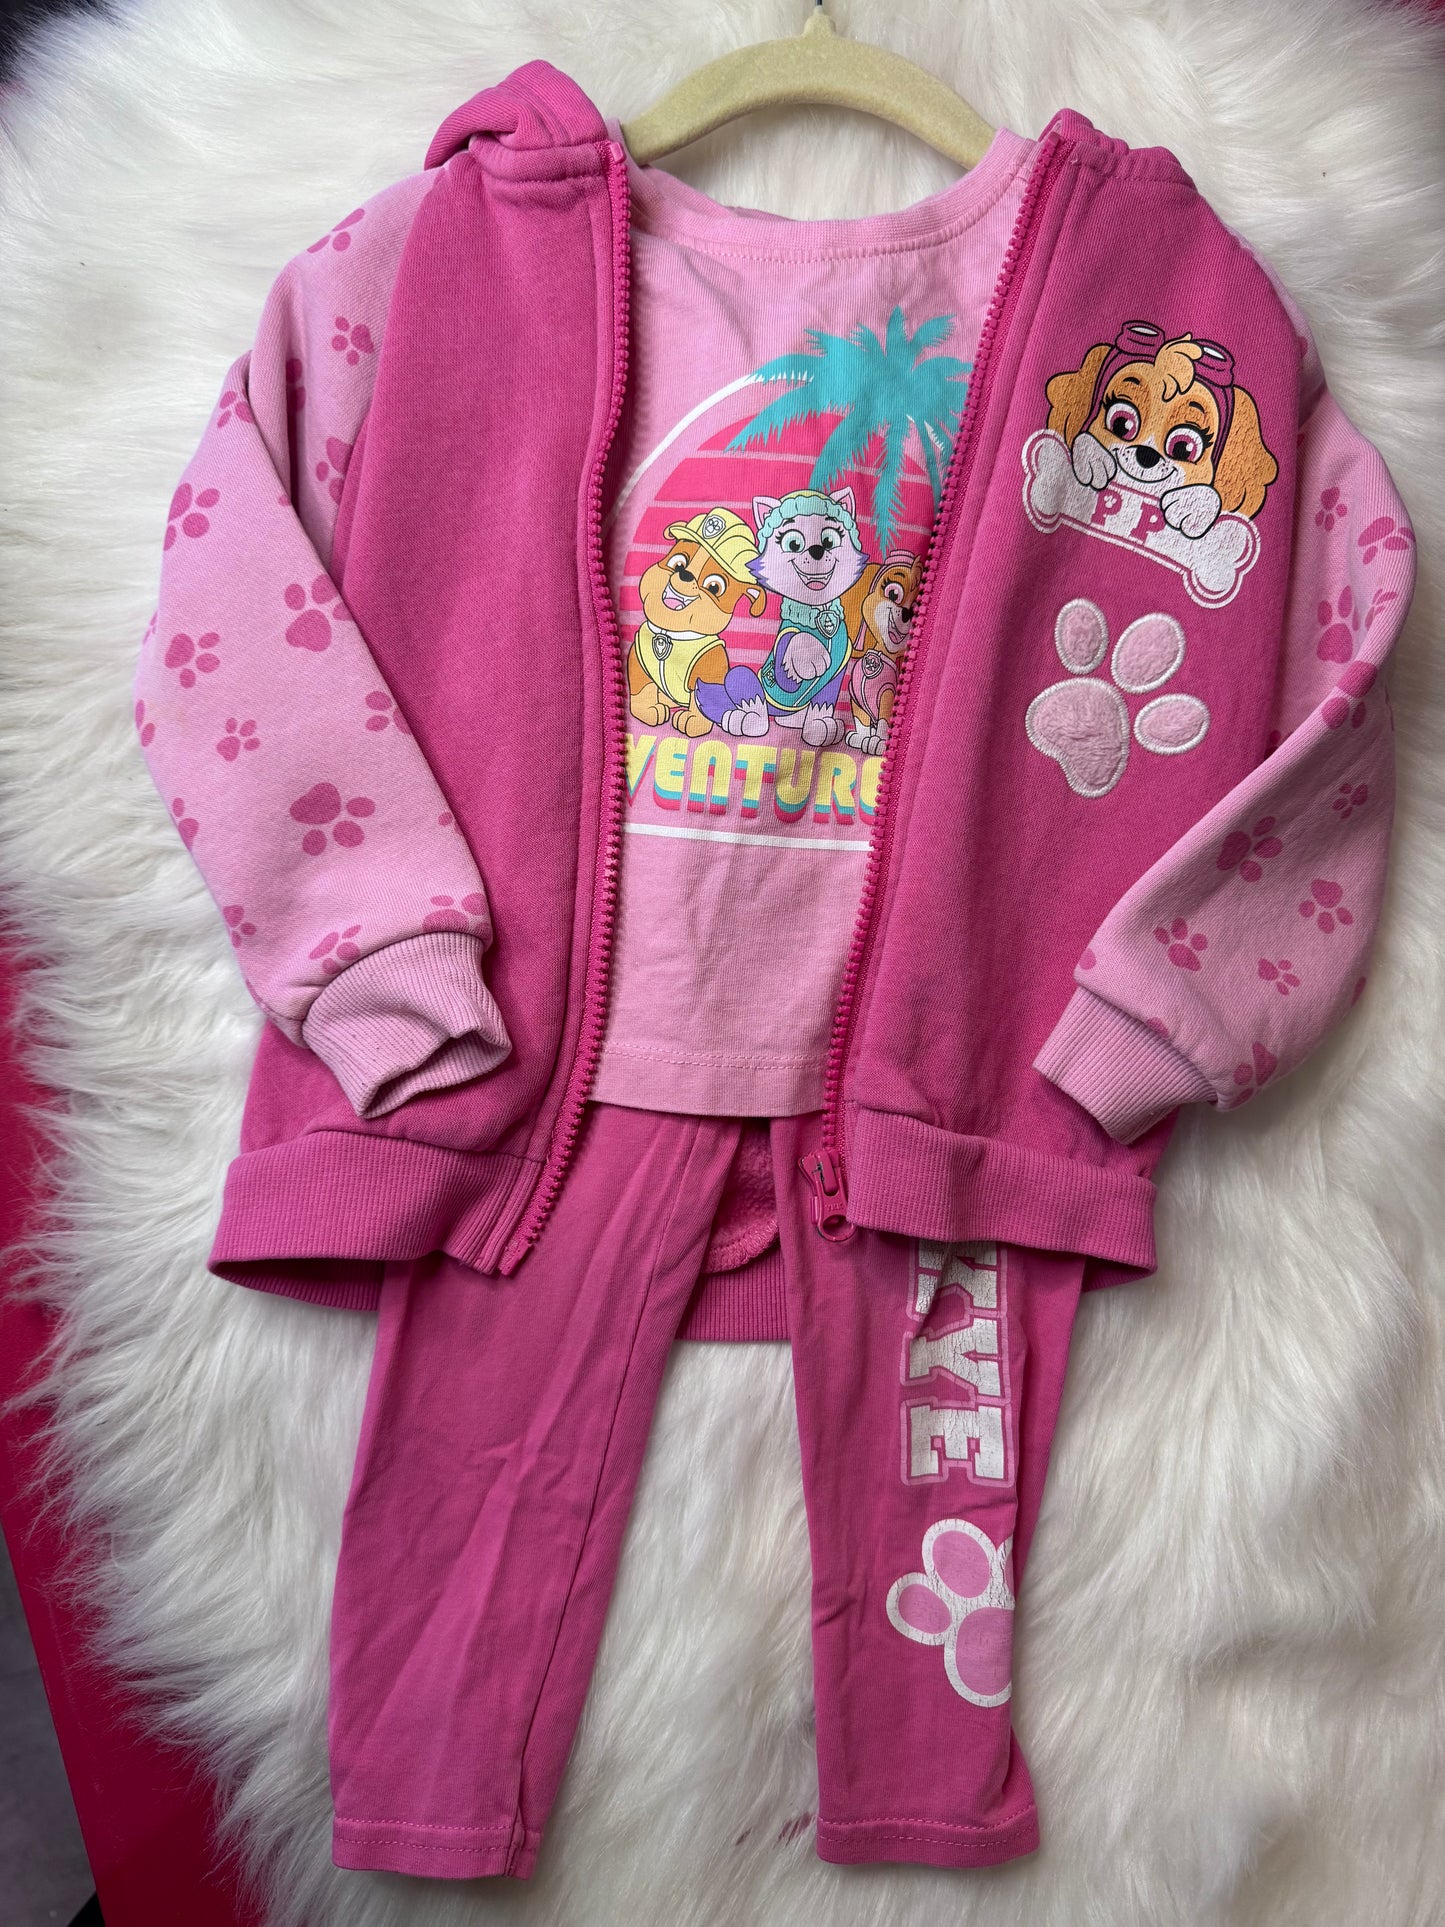 Paw Patrol Outfit - 3T